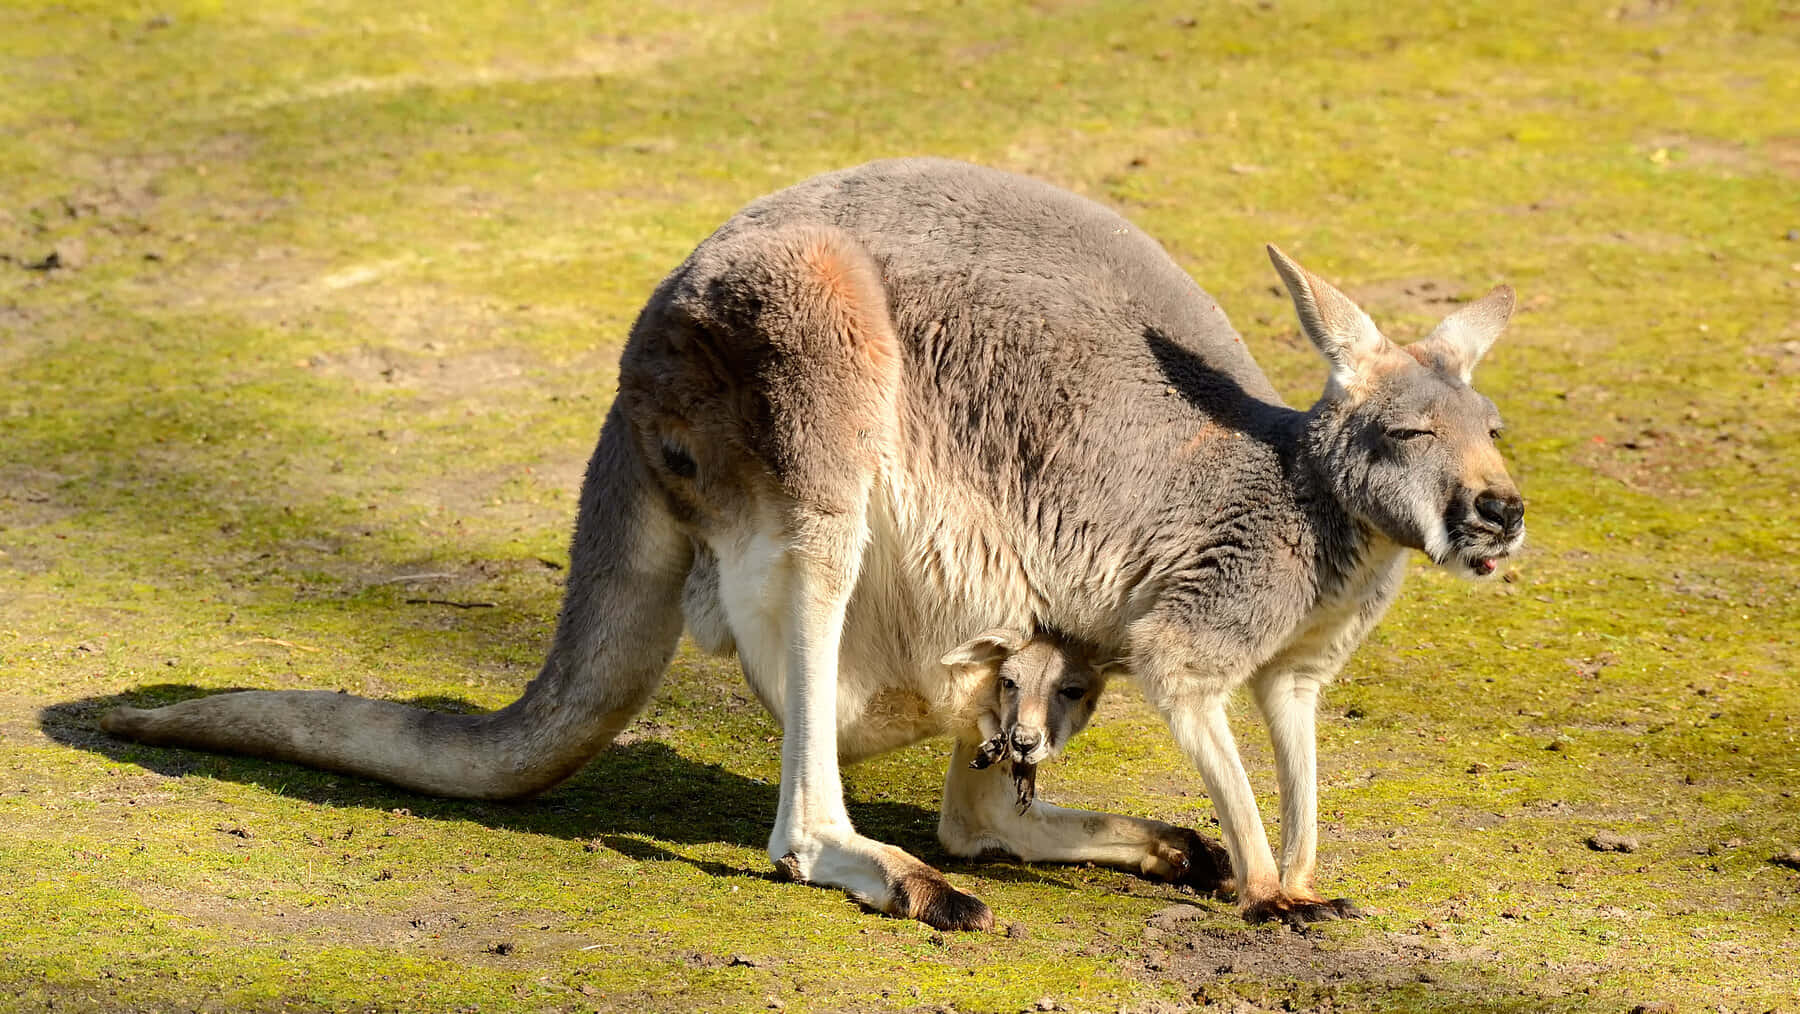 A mother kangaroo stands proudly with her joey in her pouch.